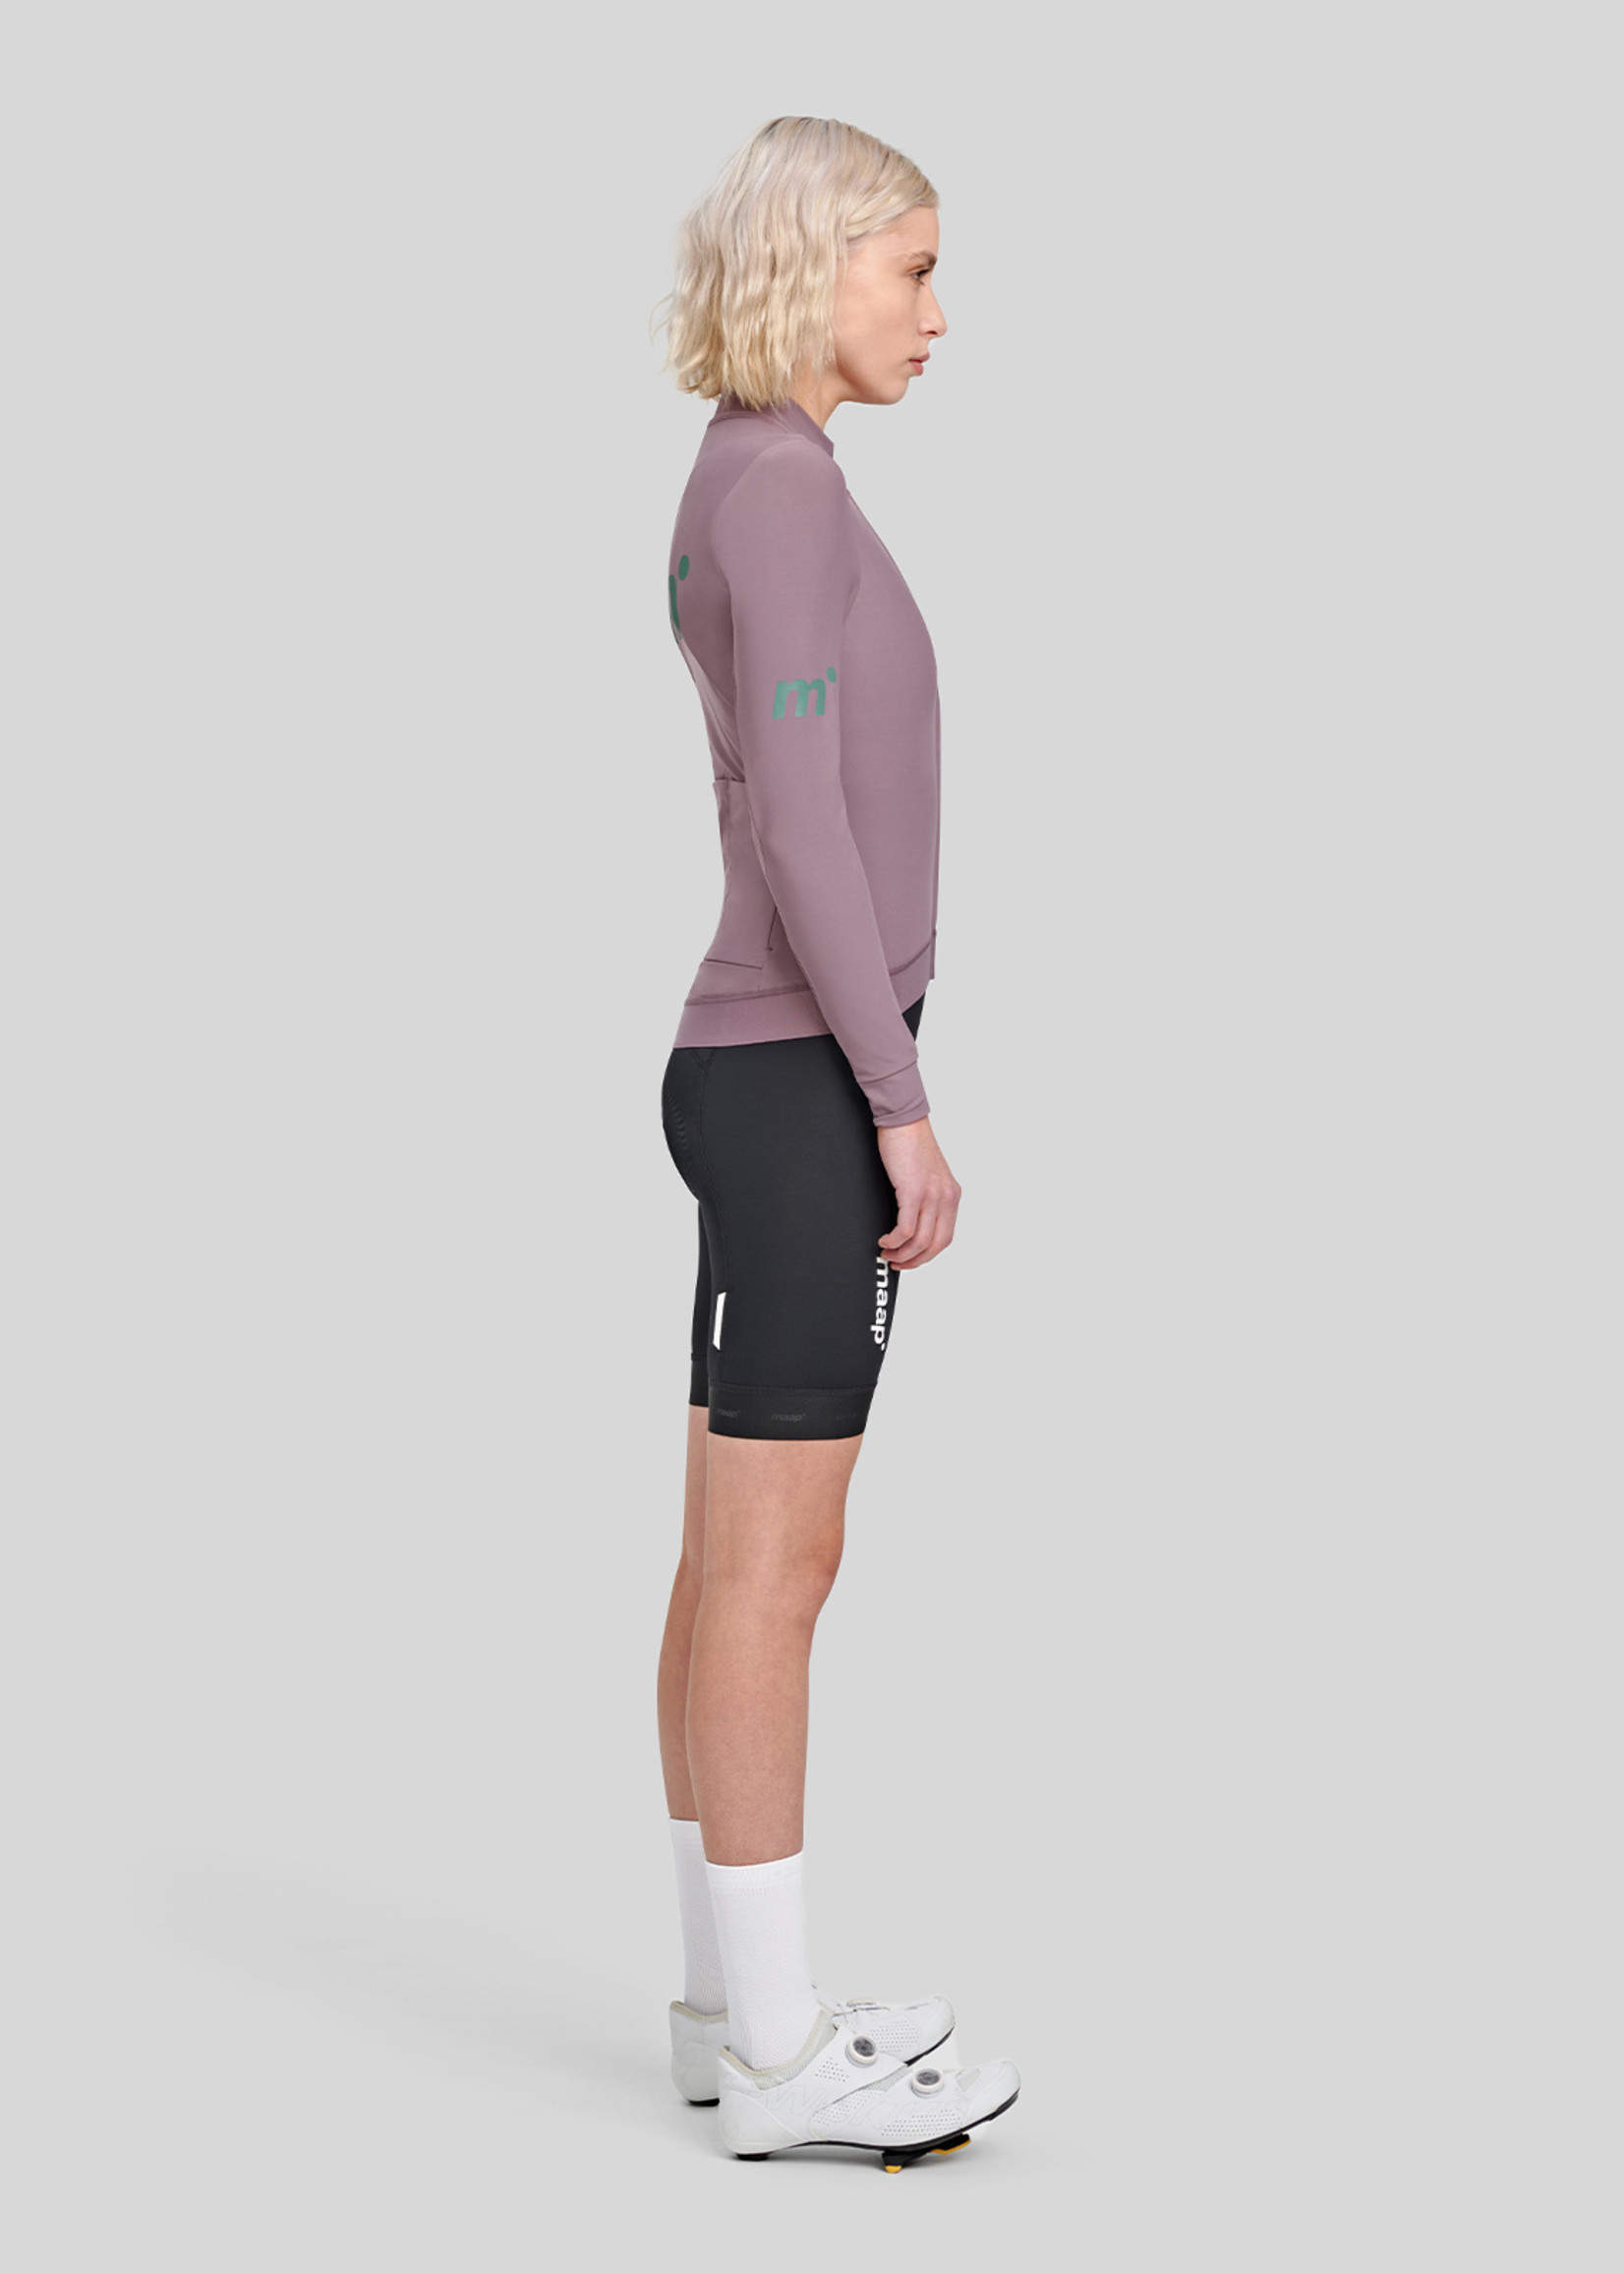 Women's Thermal Training LS Jersey - MAAP Cycling Apparel